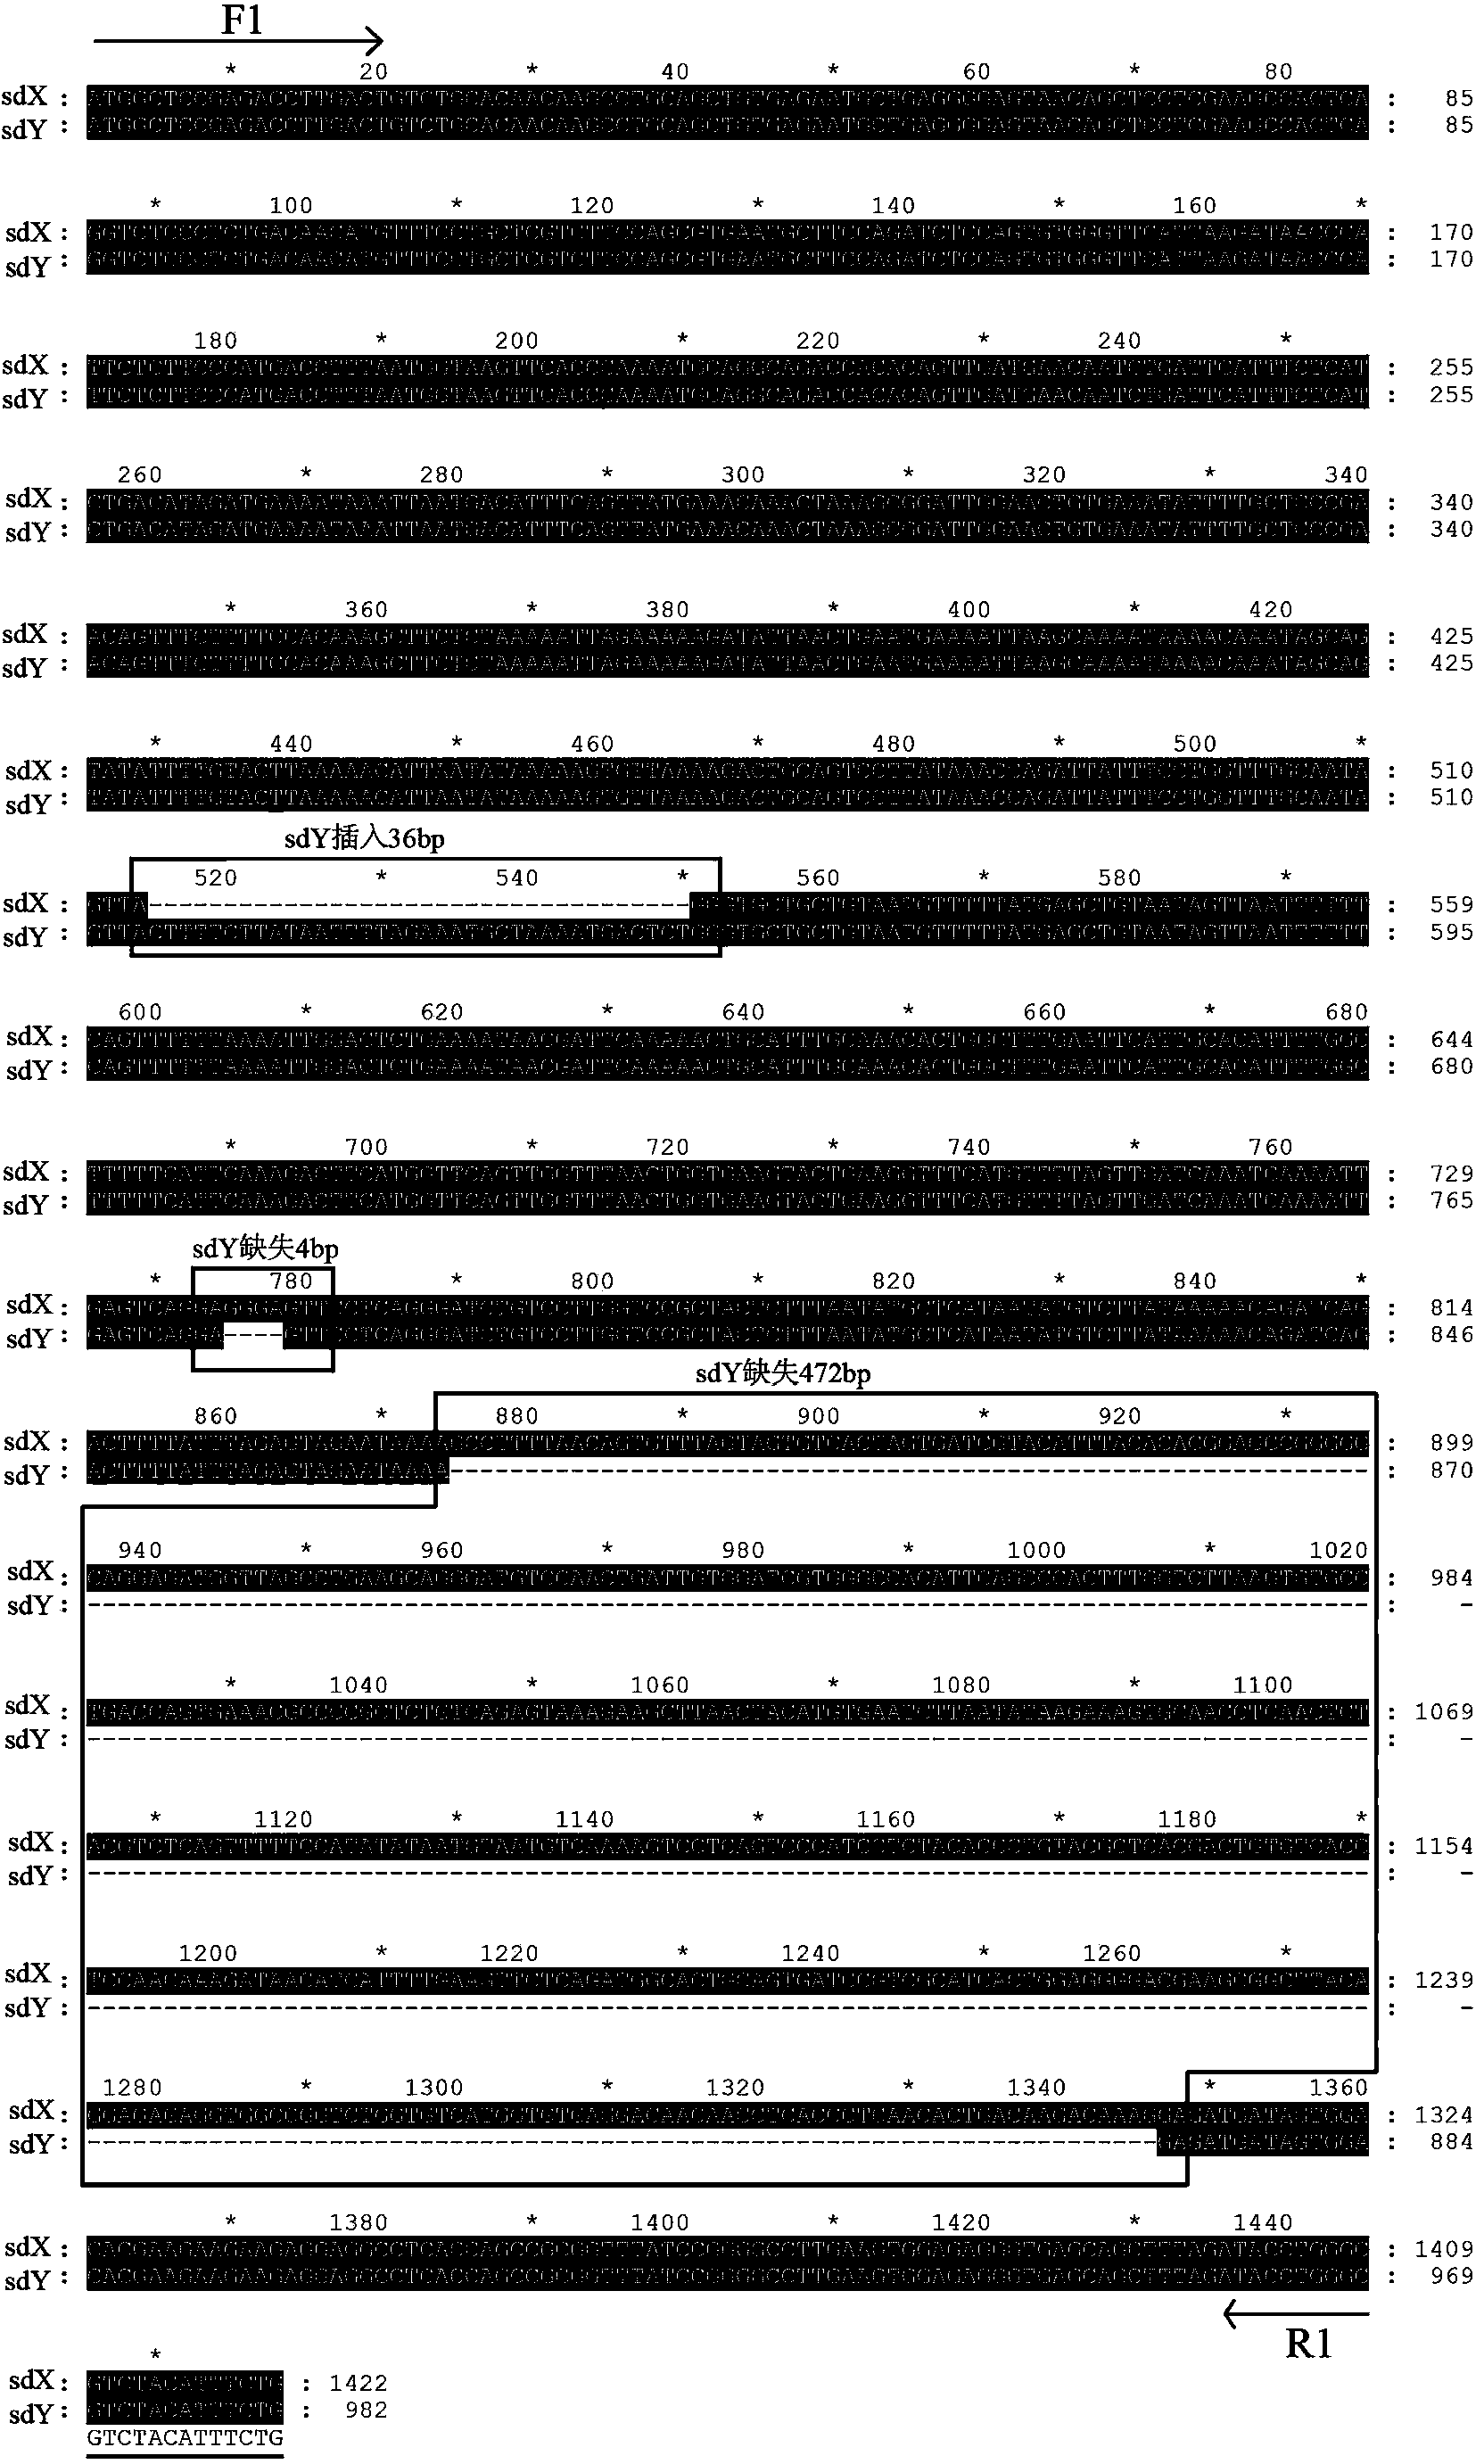 Y-chromosome specific molecular marker of Nile tilapia, and genetic sex determination method and supermale producing method both based on molecular marker